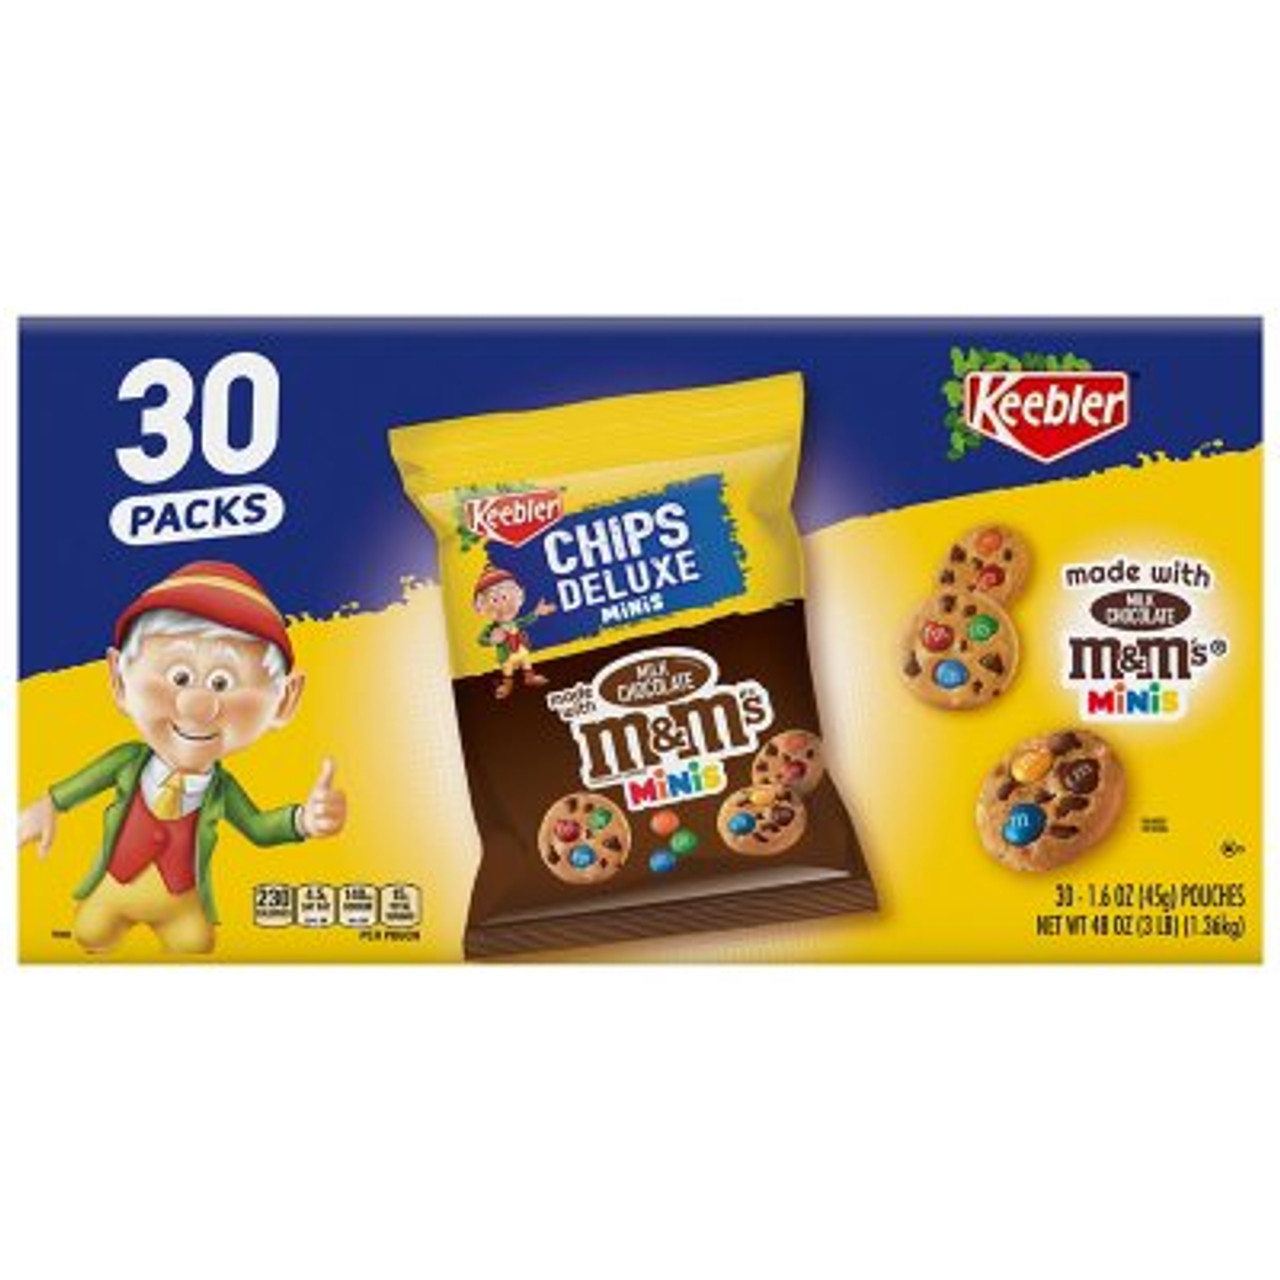 Keebler Chips Deluxe M&M Minis (1.6 oz., 30 pk.) - [From 60.00 - Choose pk Qty ] - *Ships from Miami